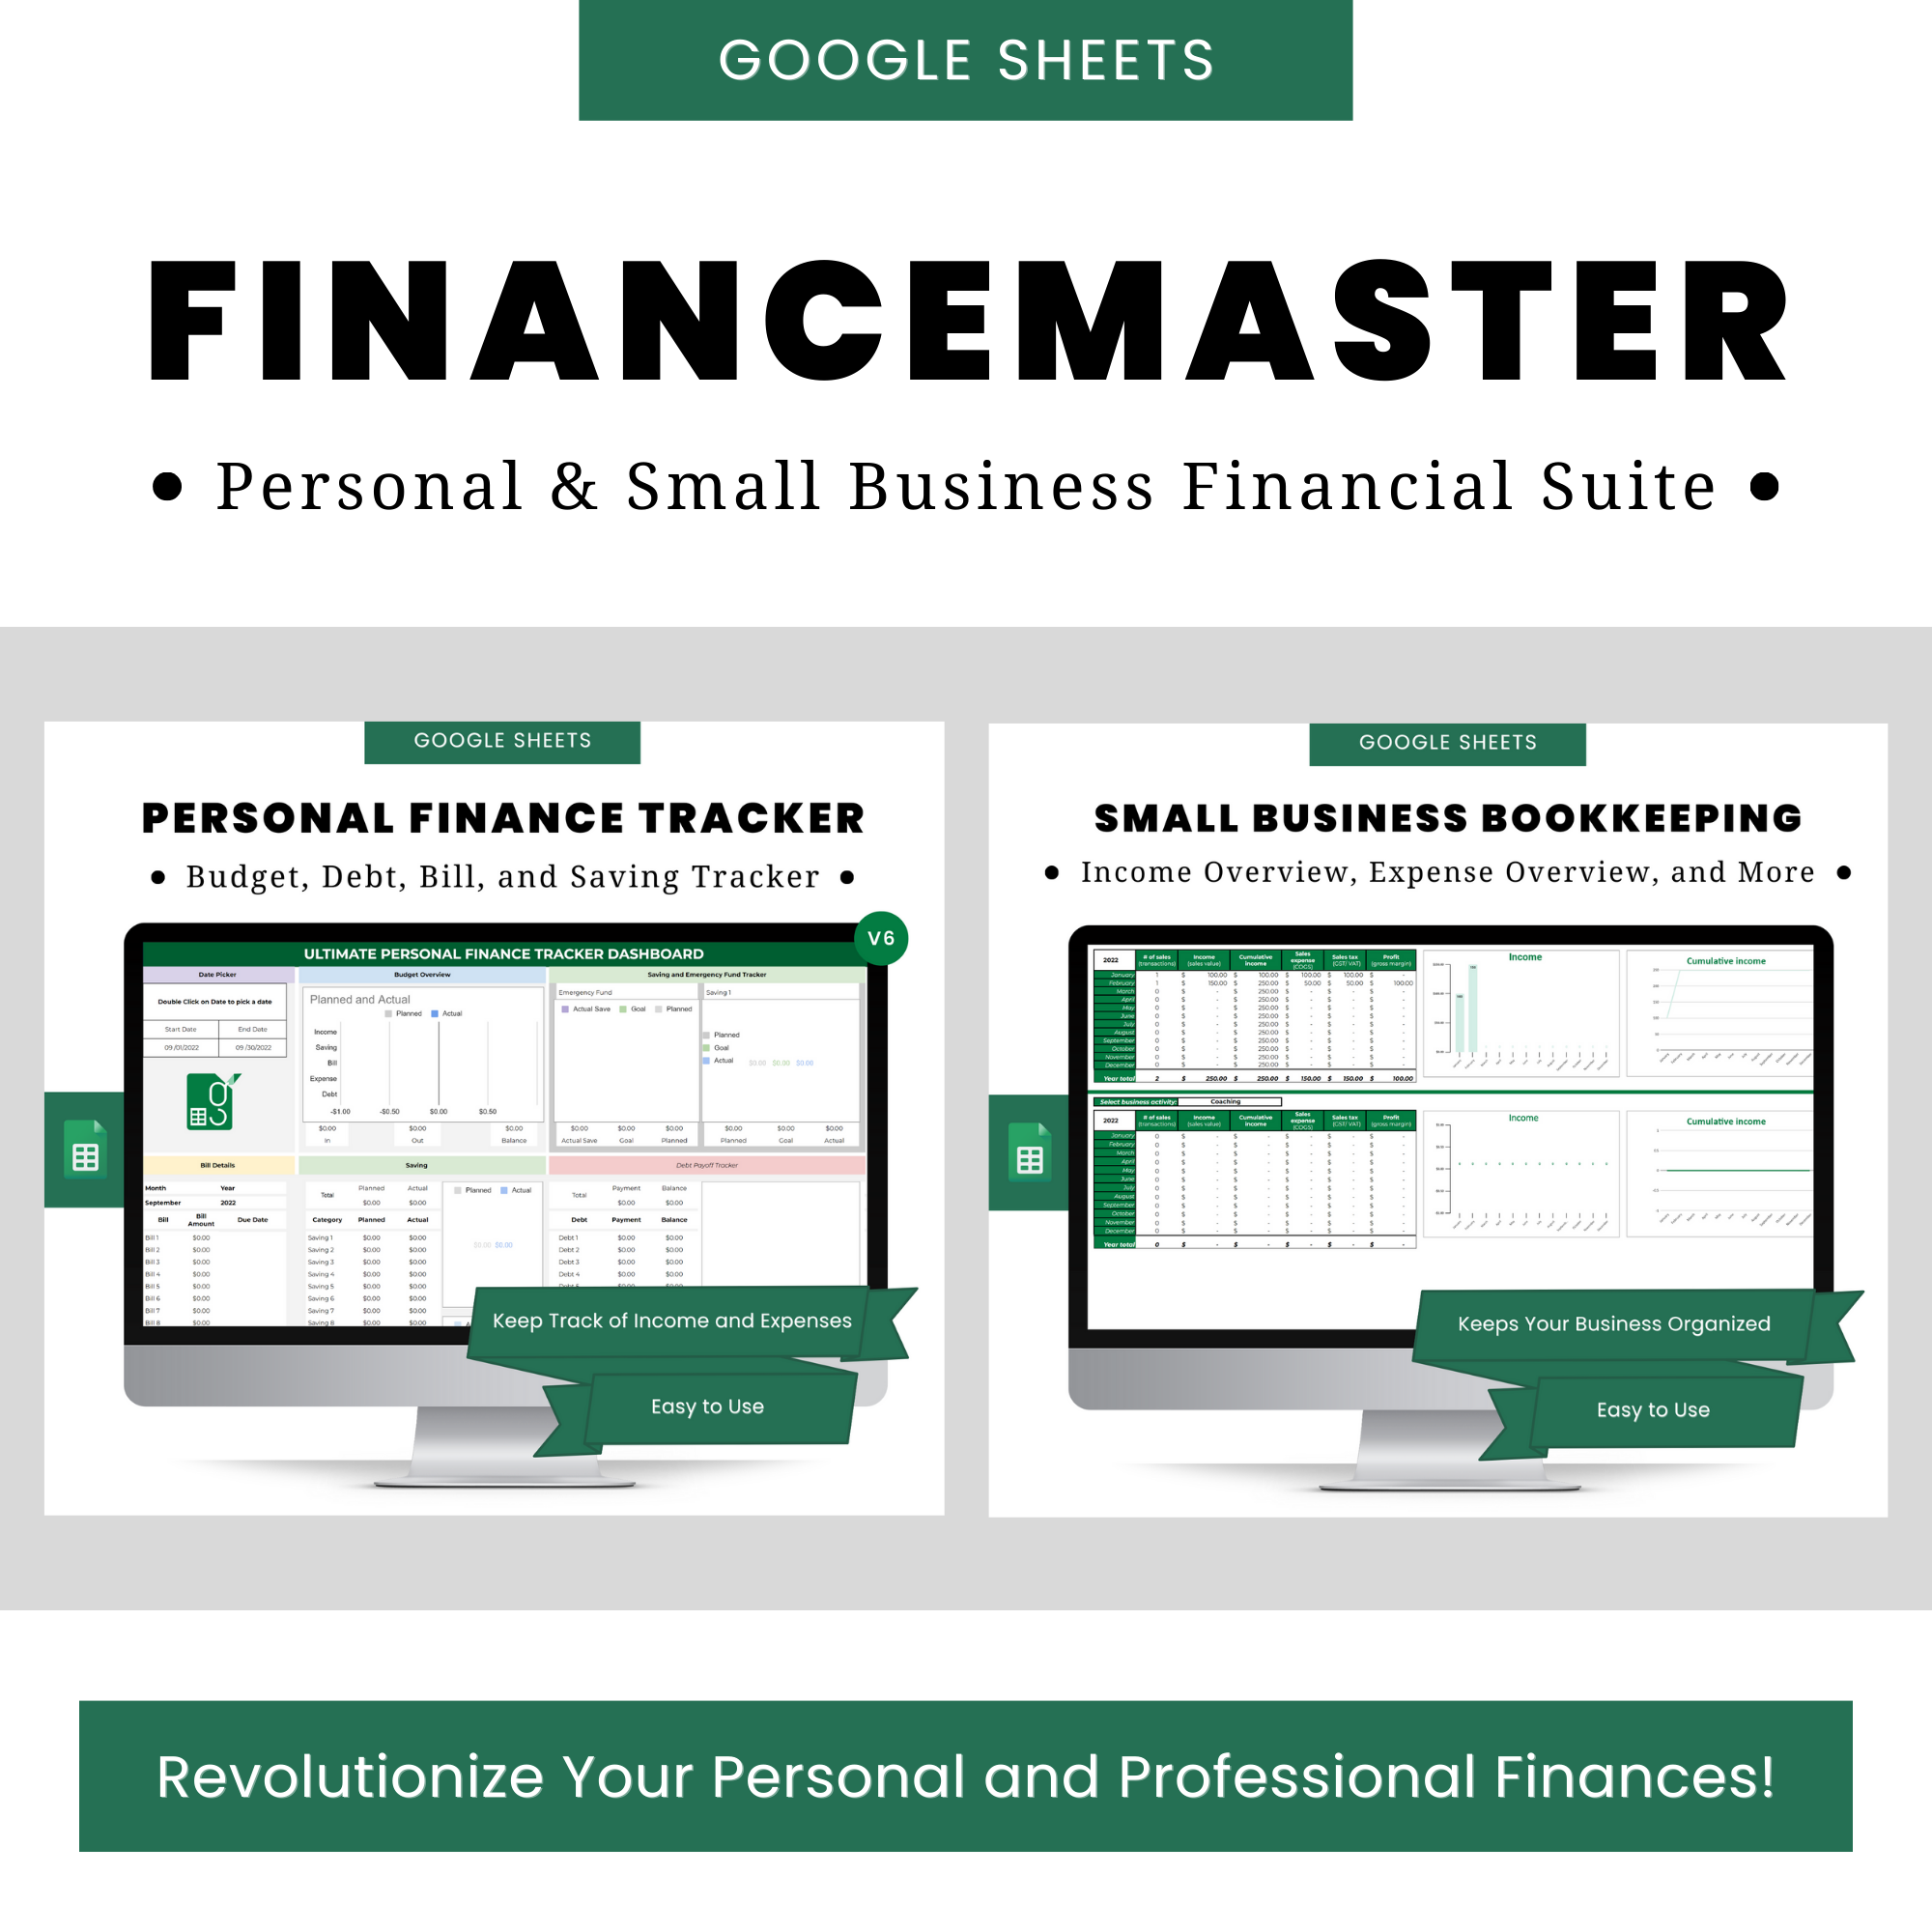 FinanceMaster: Personal & Small Business Financial Suite